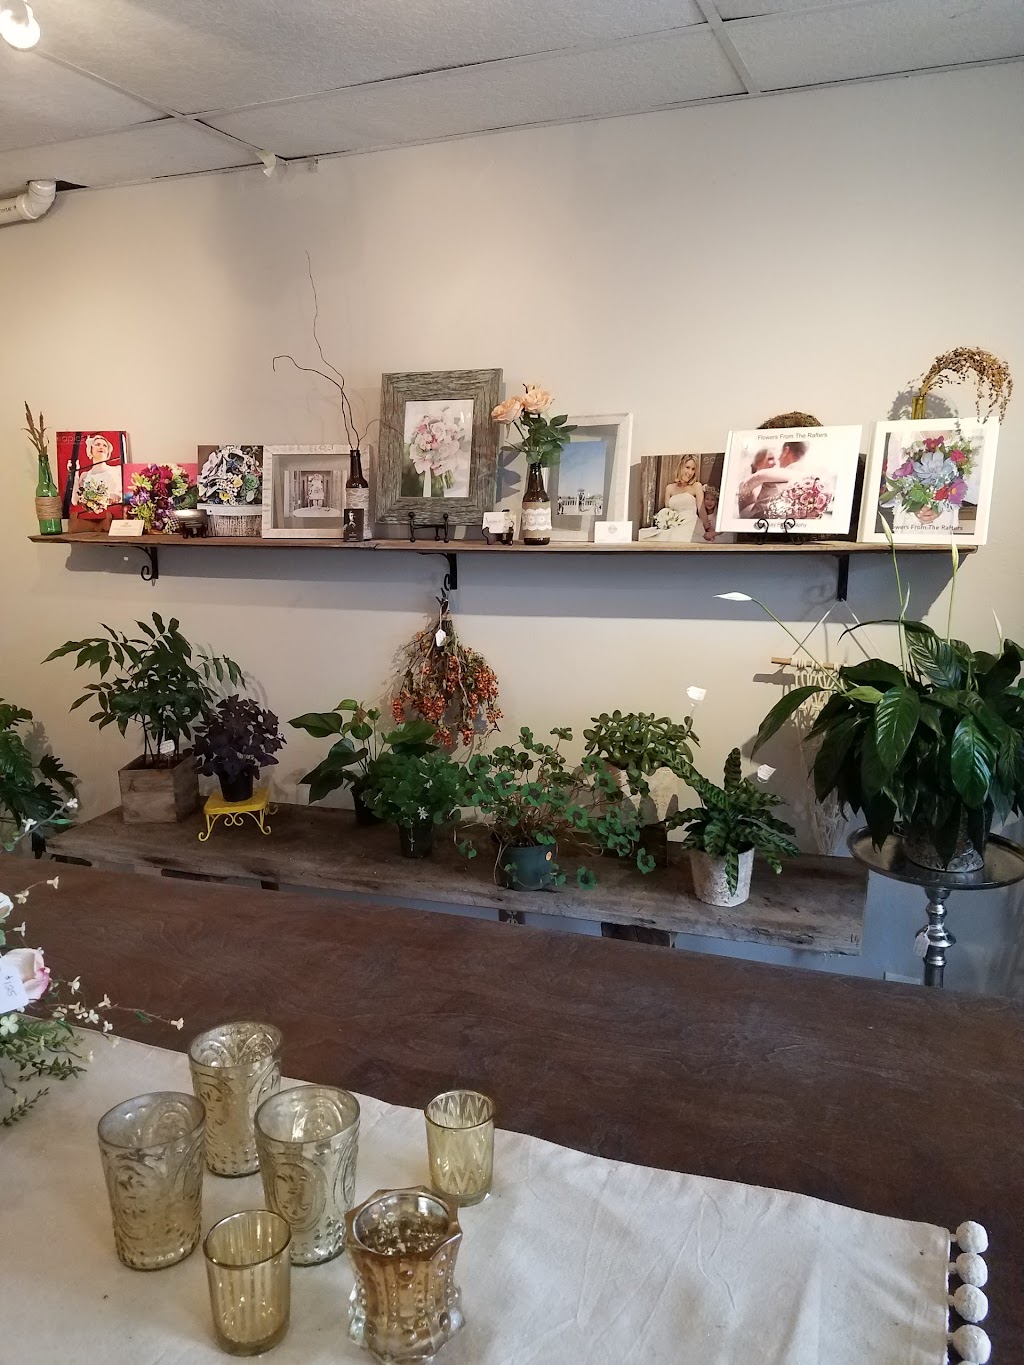 Flowers from the Rafters | 27 N Broadway St, Lebanon, OH 45036 | Phone: (513) 932-2700